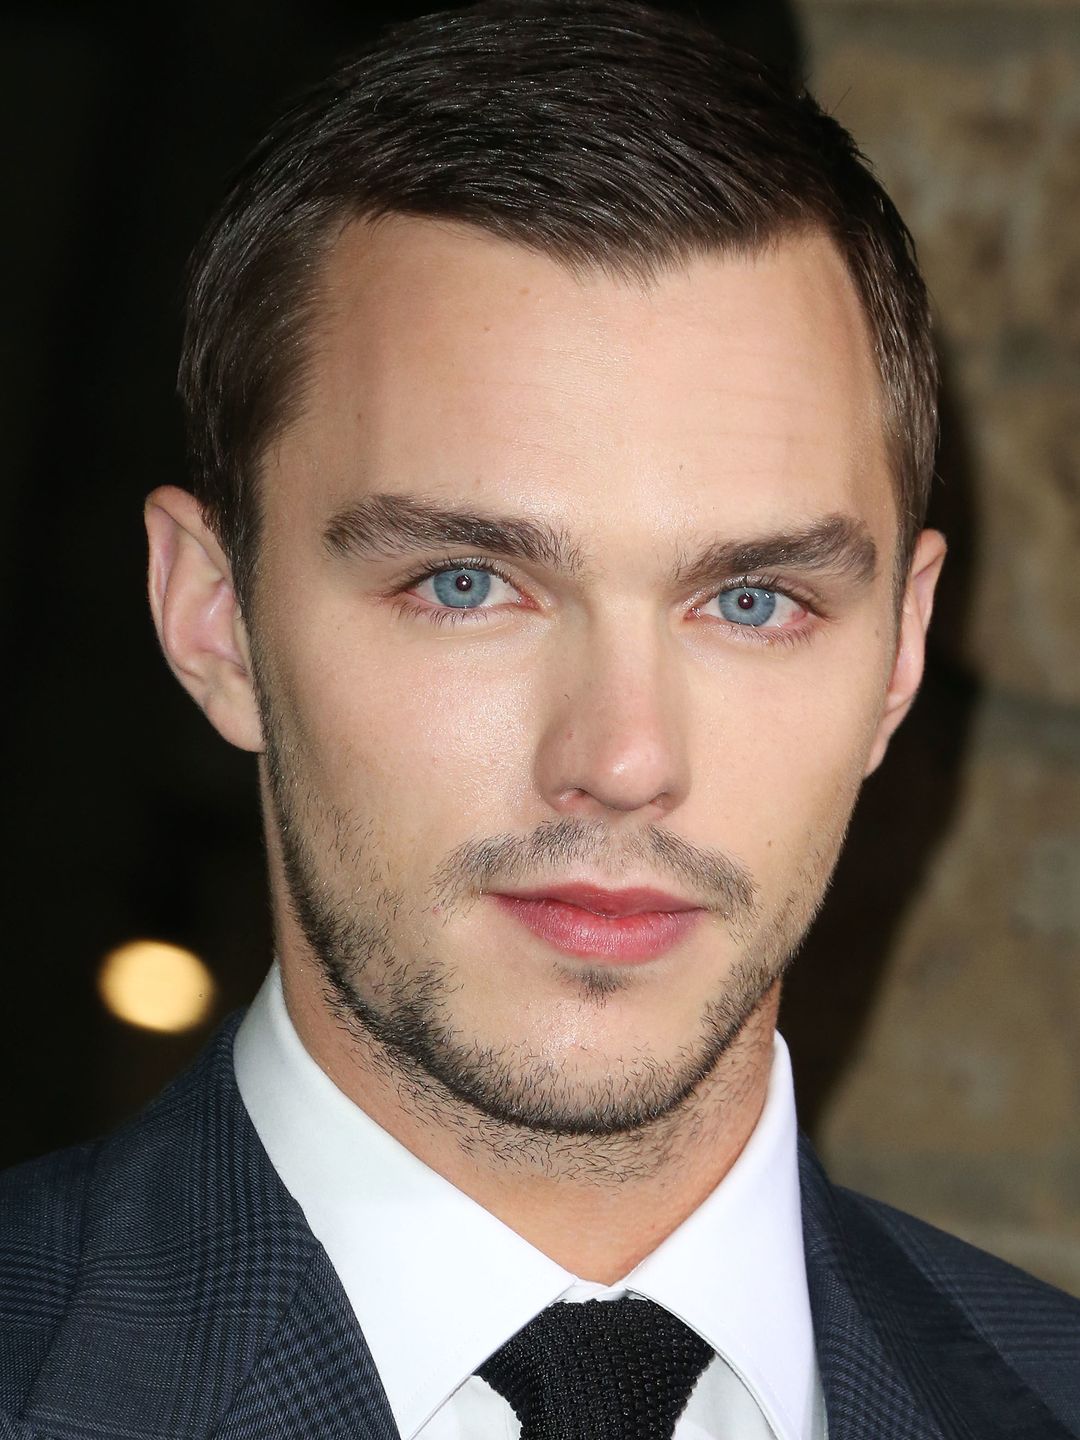 Nicholas Hoult who is he